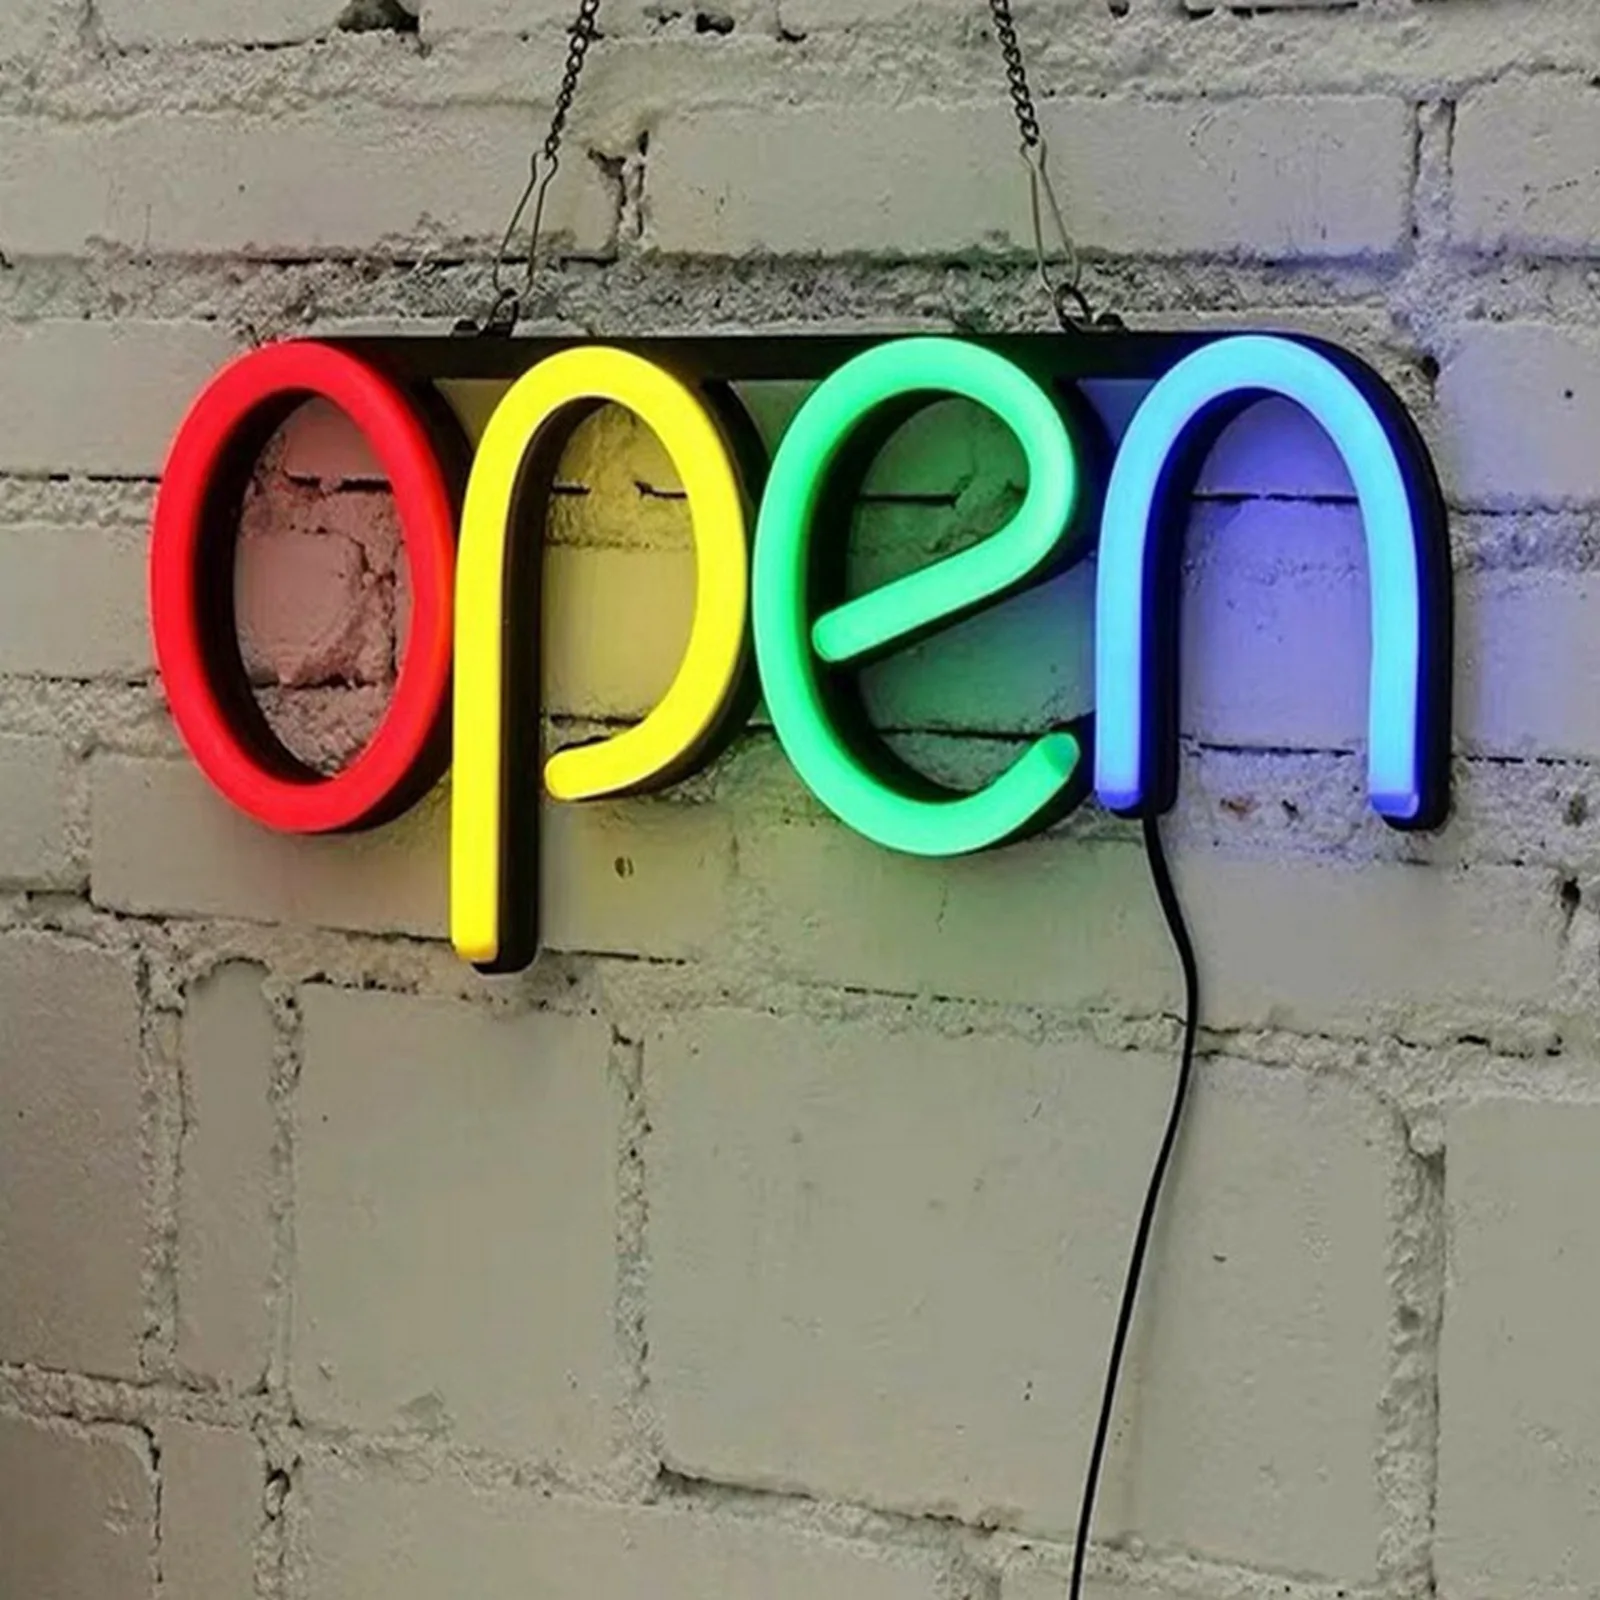 

LED Shop Opening OPEN Sign Business Store Neon Sign Advertising Lamp Light Window Chandelier Big Top Flashing Attract Attention